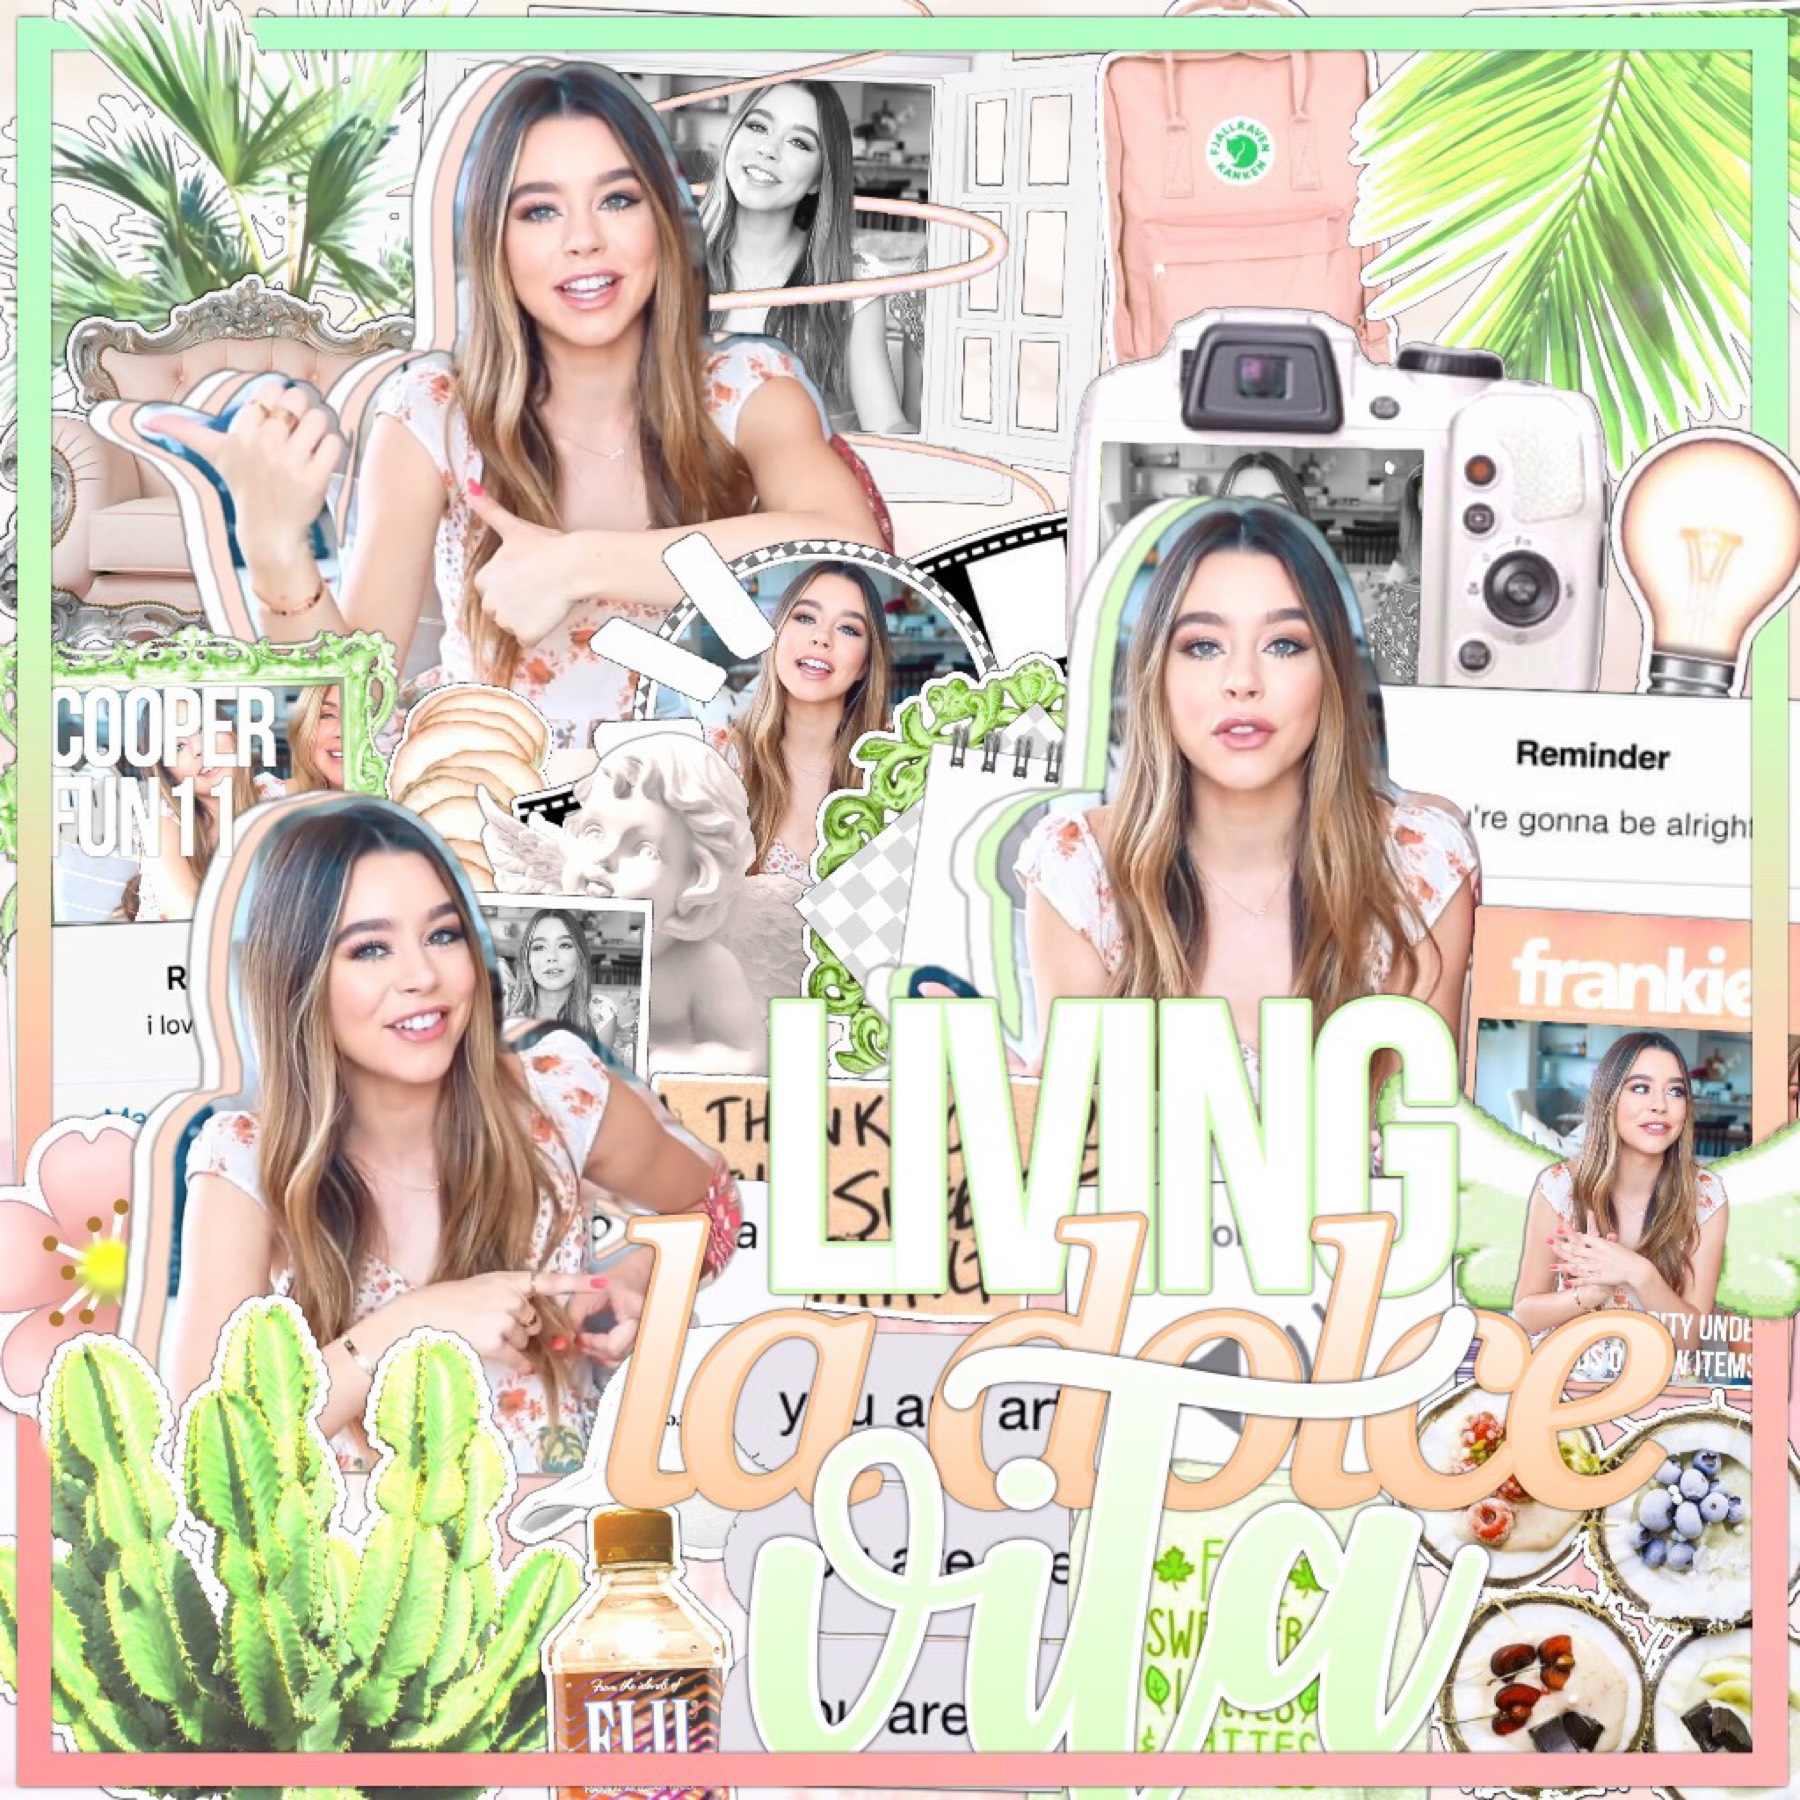 look who’s posting once again!✌🏻I love this edit, hope you guys like it!💘 any tips for cleaning your room?🍊 my room looks like an episode out of ‘hoarders’ haha lol☀️🍃